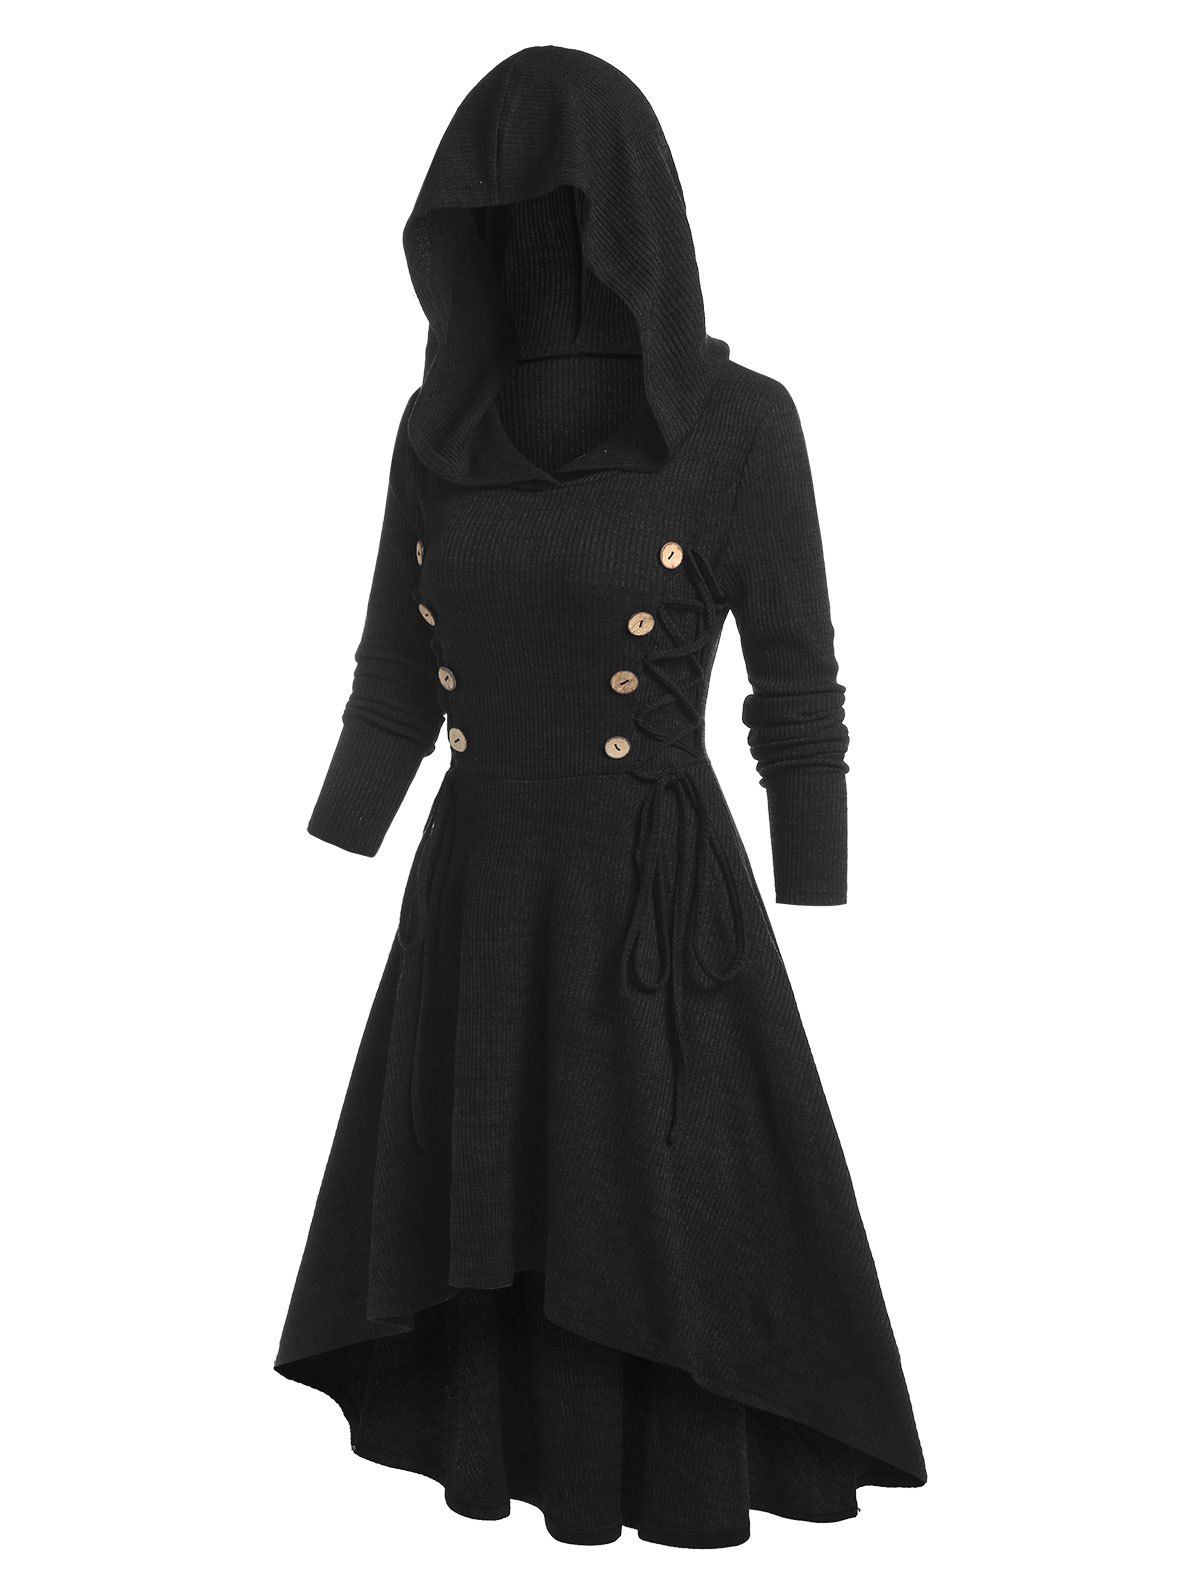 Hooded Lace-up High Low Sweater Dress - BLACK M